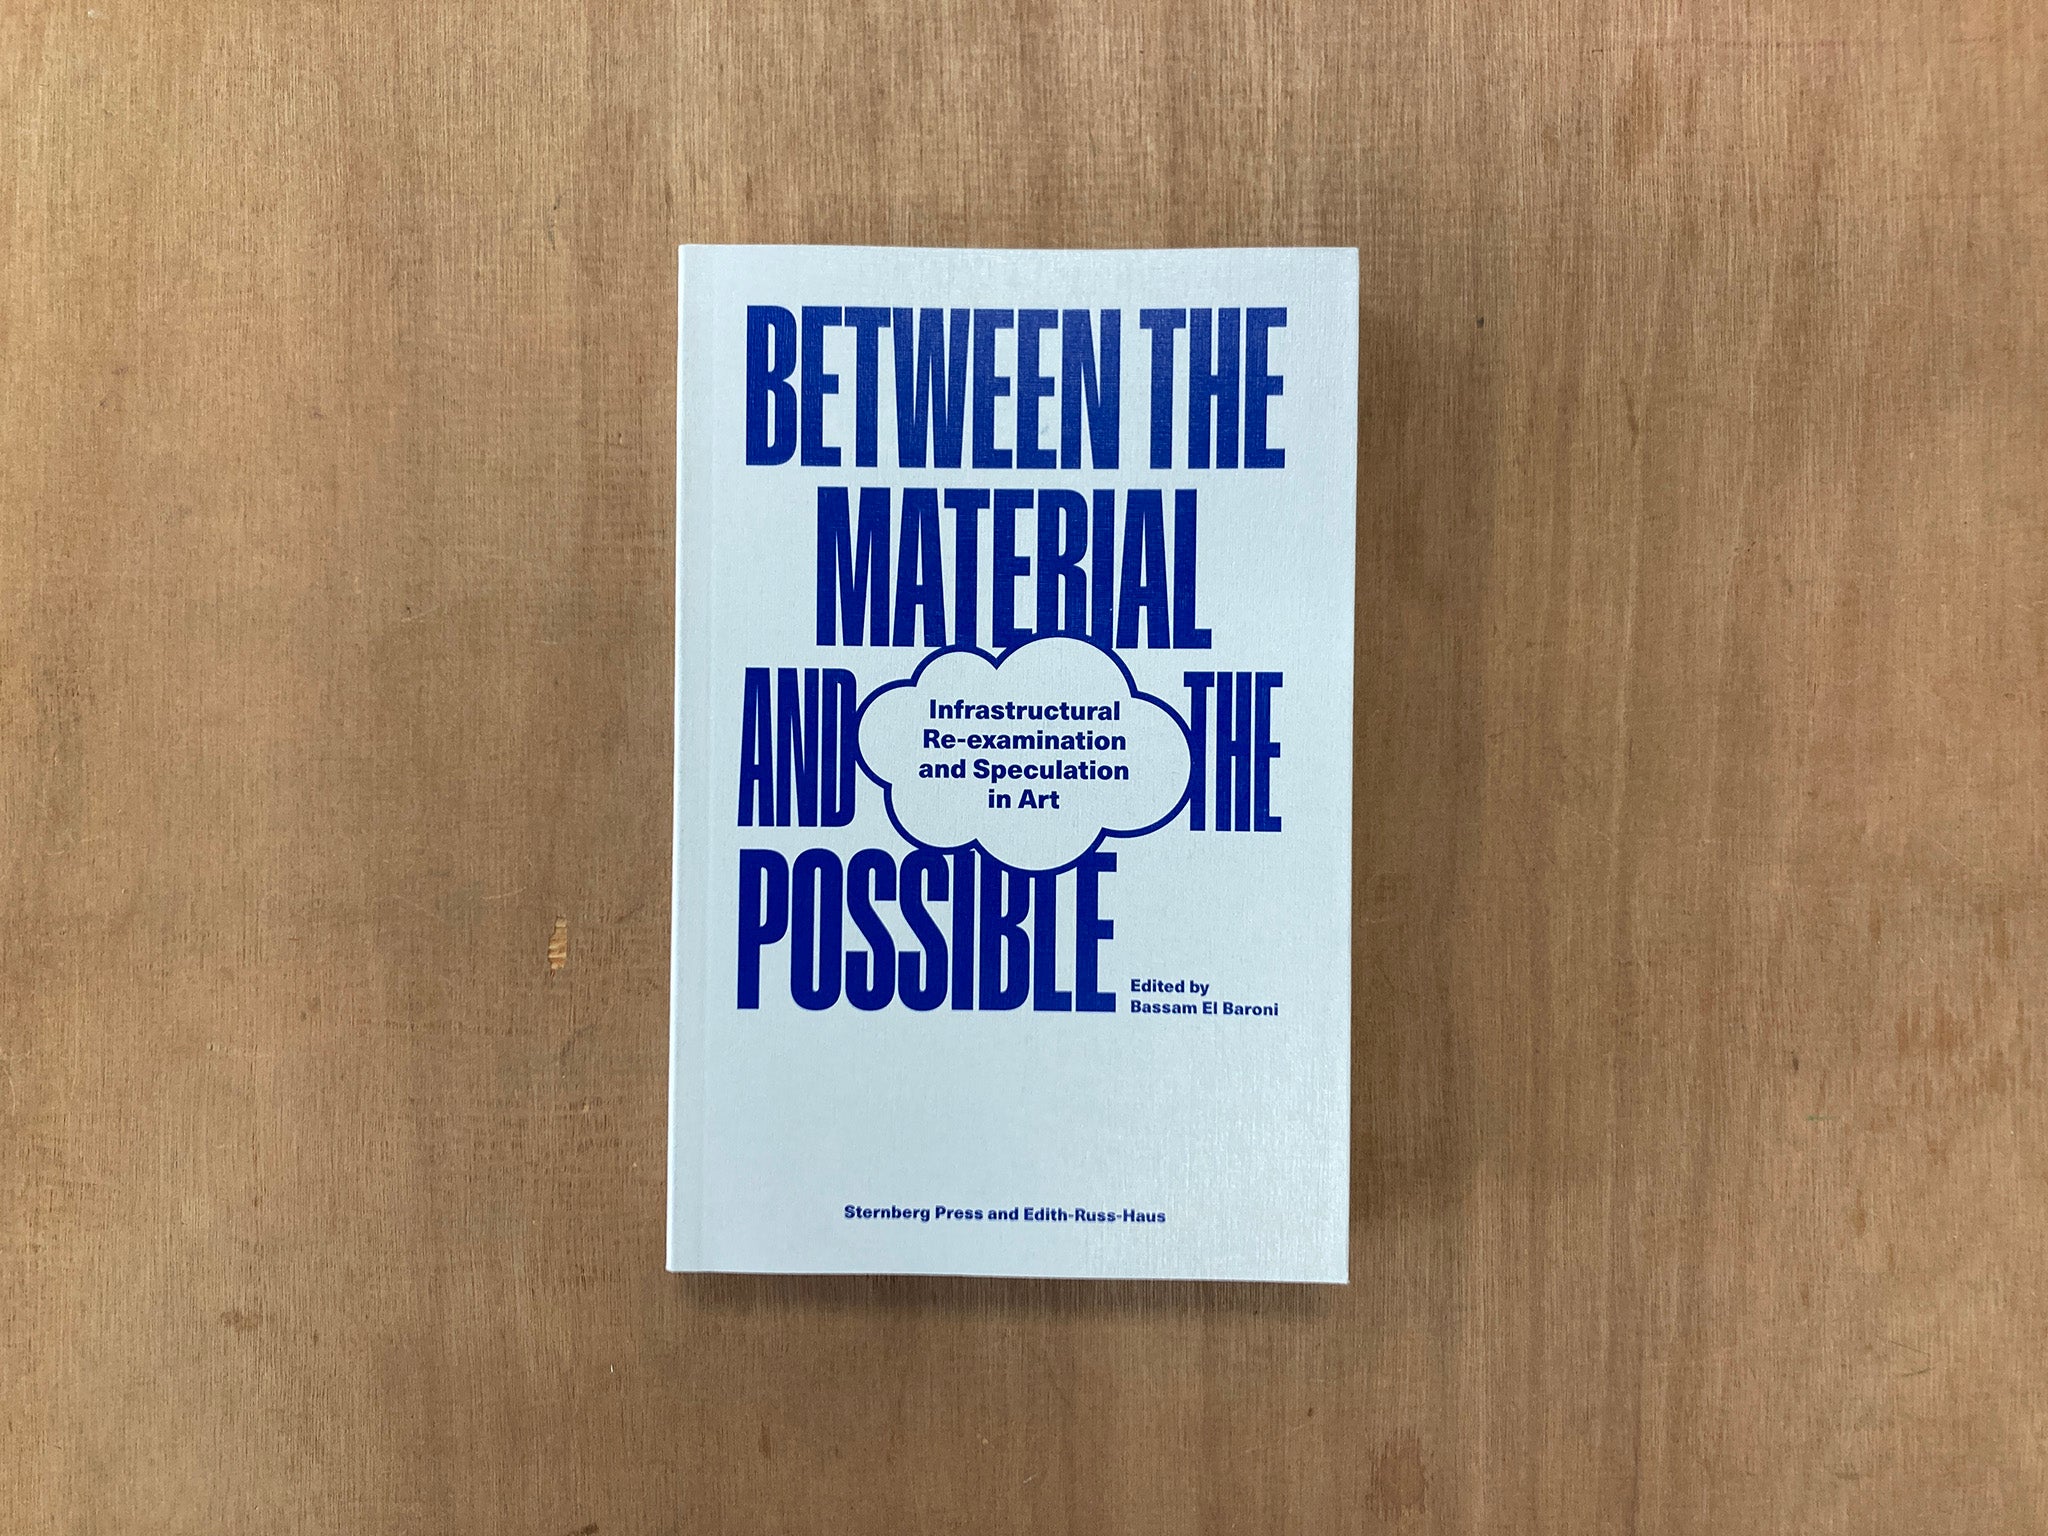 BETWEEN THE MATERIAL AND THE POSSIBLE: INFRASTRUCTURAL RE-EXAMINATION AND SPECULATION IN ART edited by Bassam el Baroni